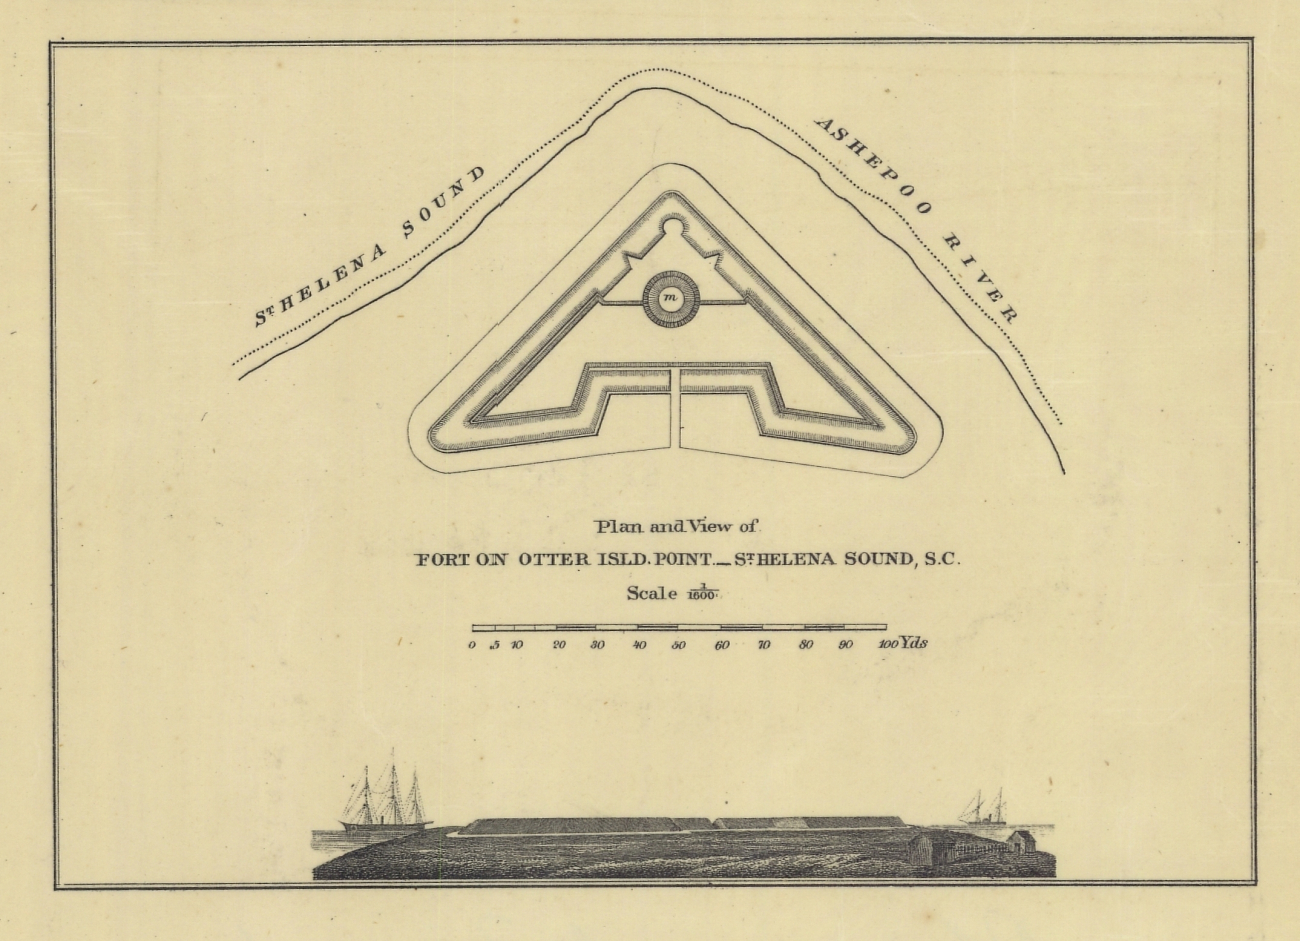 Plan and view of Fort Otter Island Point - St